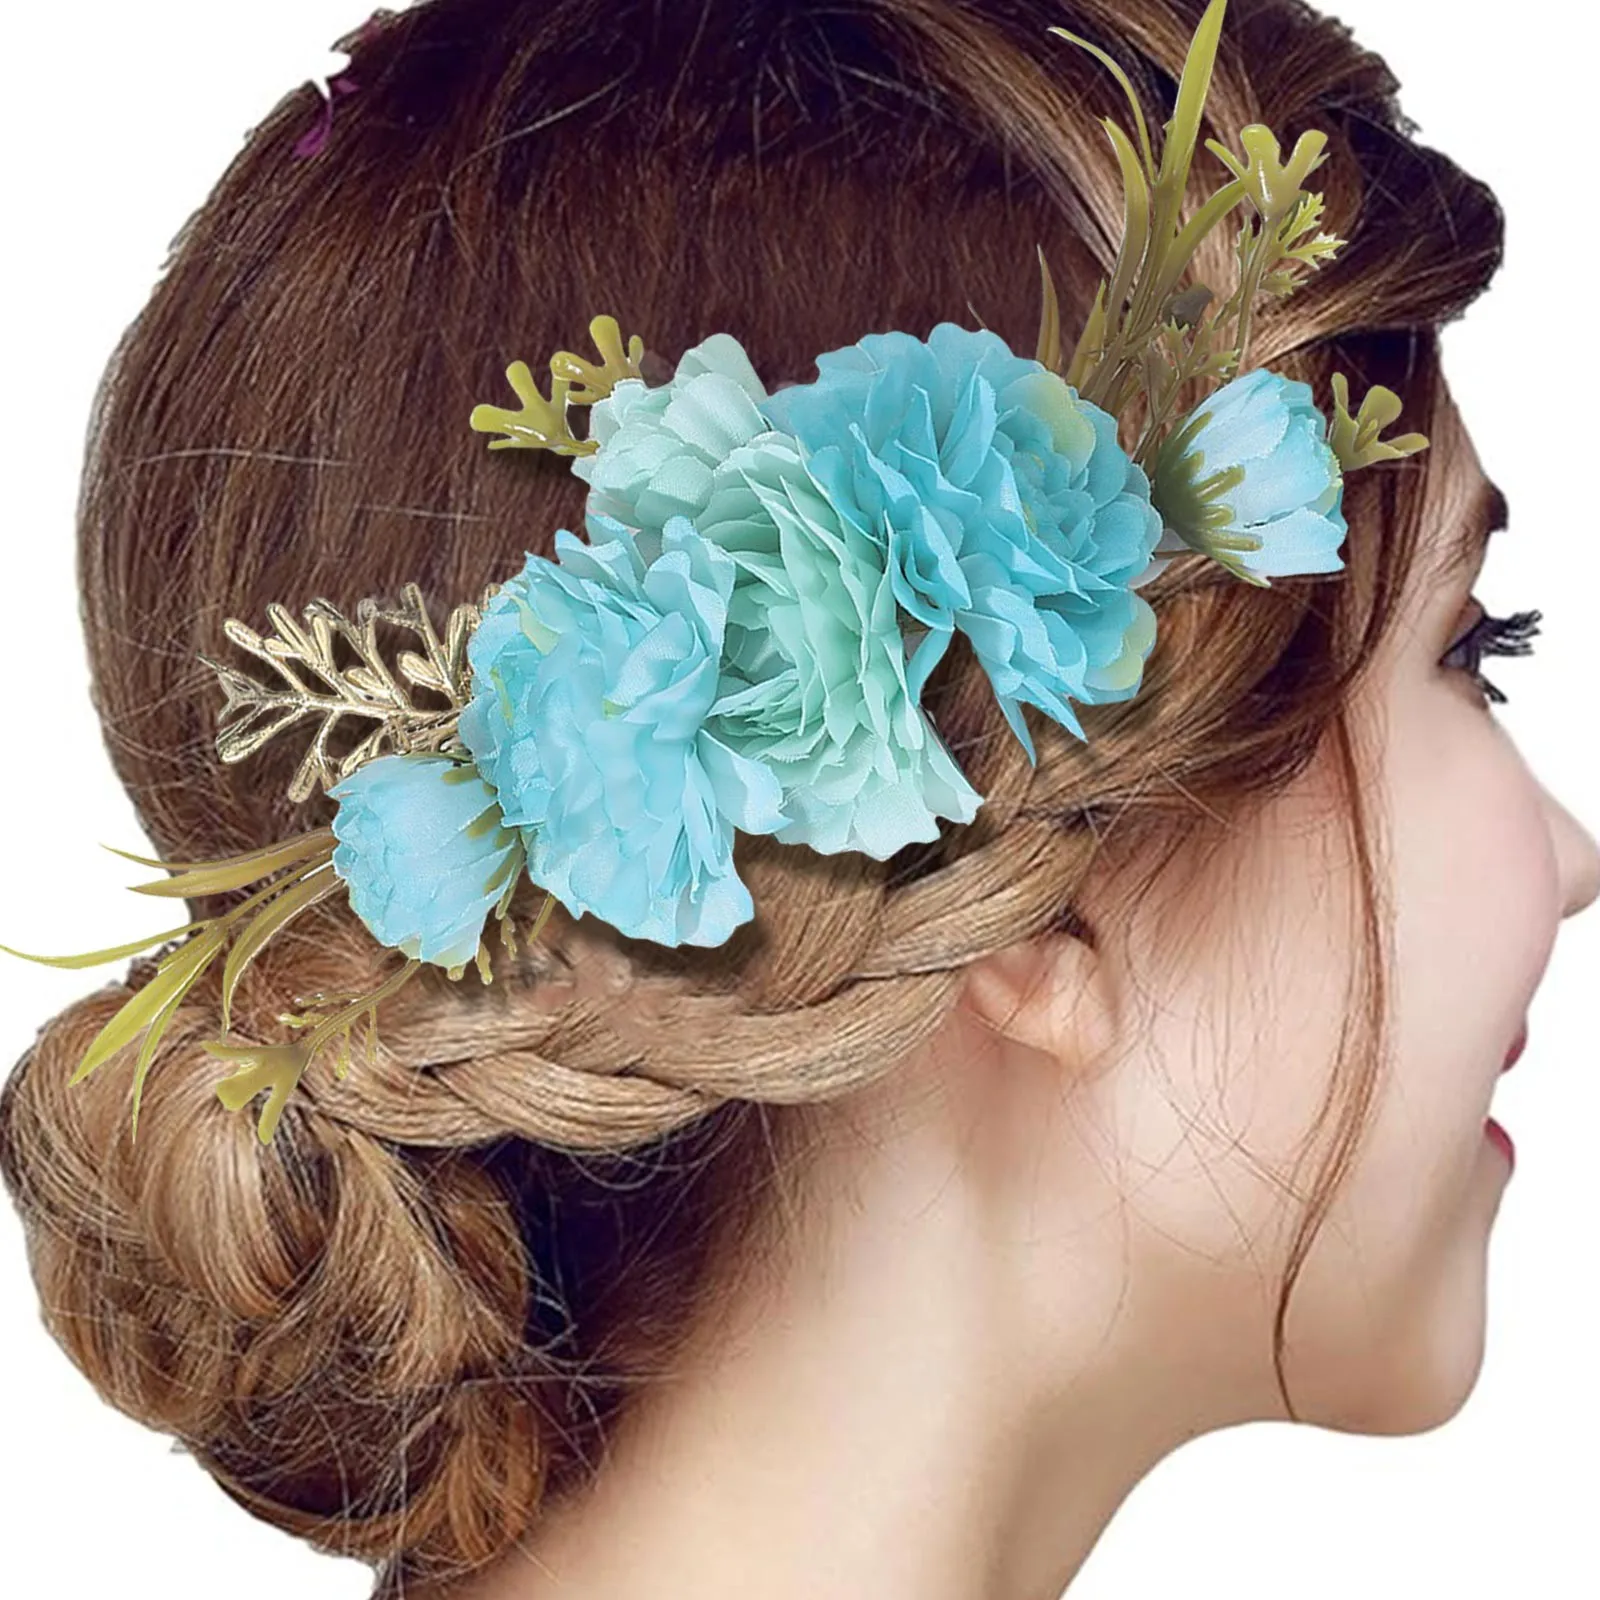 

Flower Metal Hair Side Combs Slide Hair Clips With Teeth Floral Hair Bows Hairpins Grips Barrettes Headbands for Women Fashion